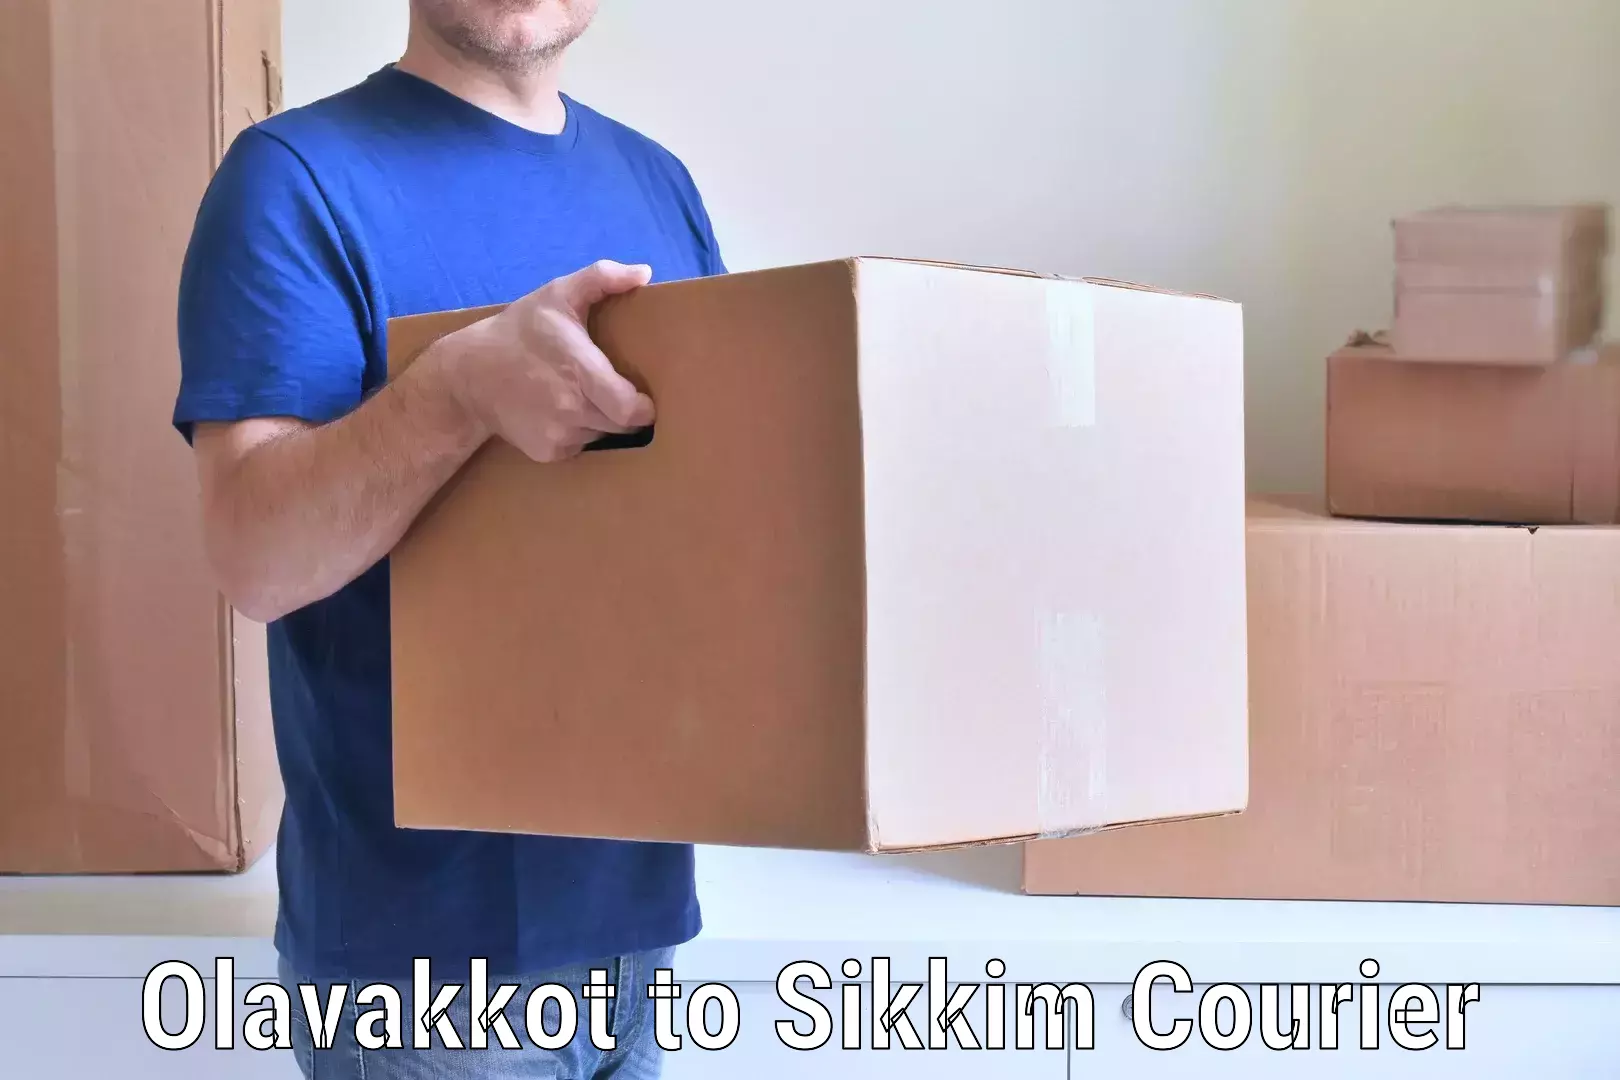 Furniture delivery service Olavakkot to Sikkim